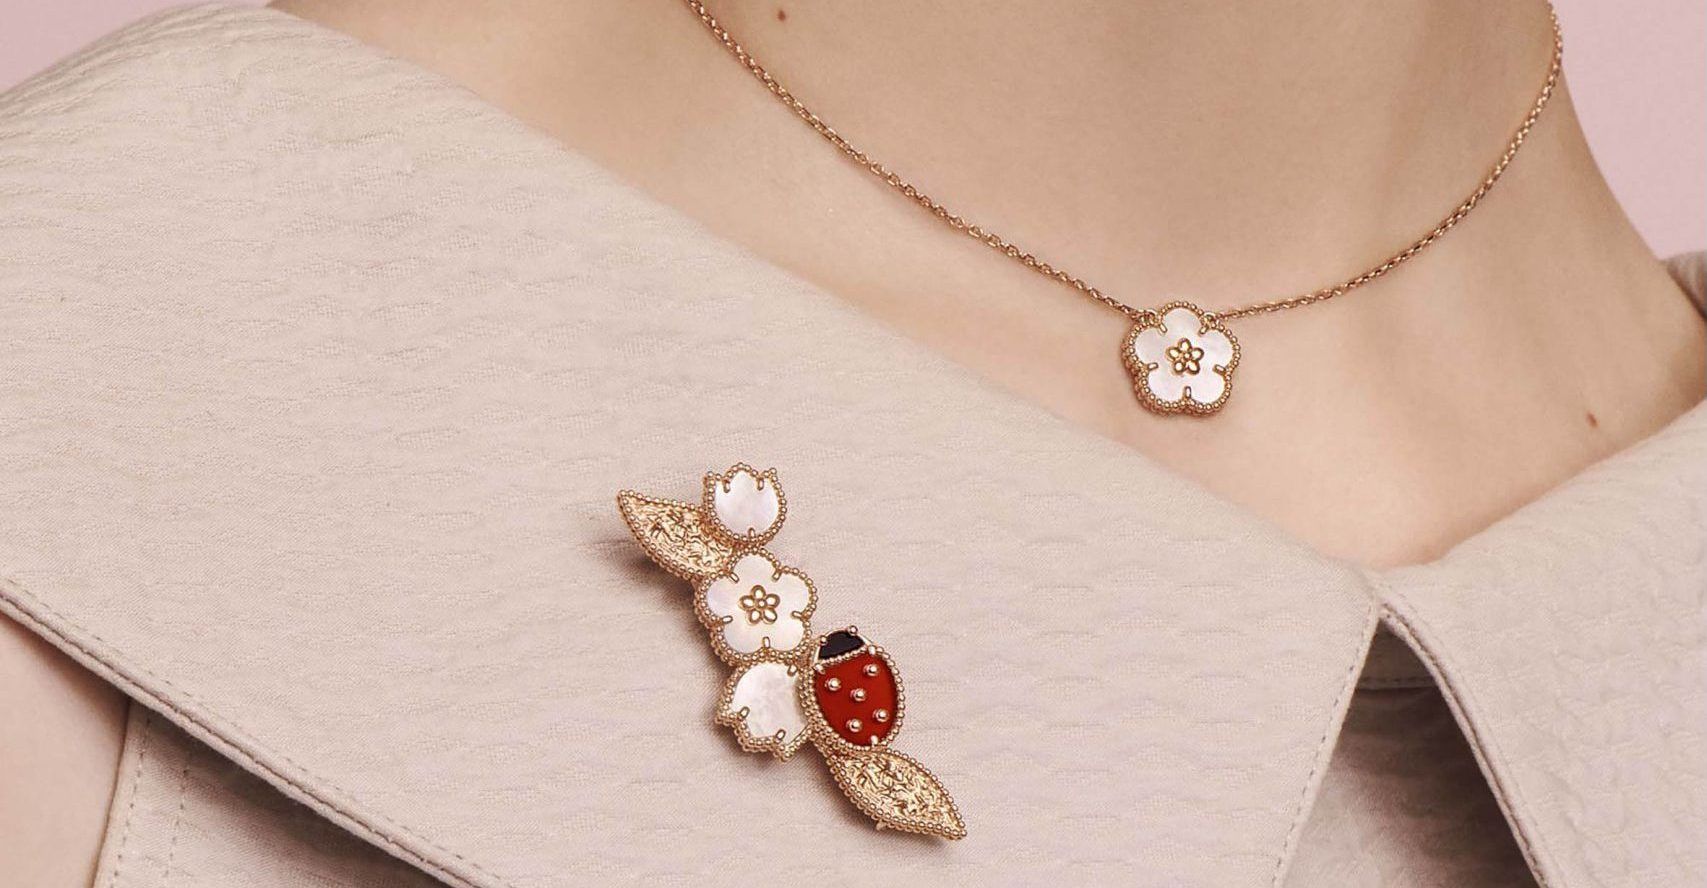 Dior's New Jewelry Collection Is Designed for Good Luck